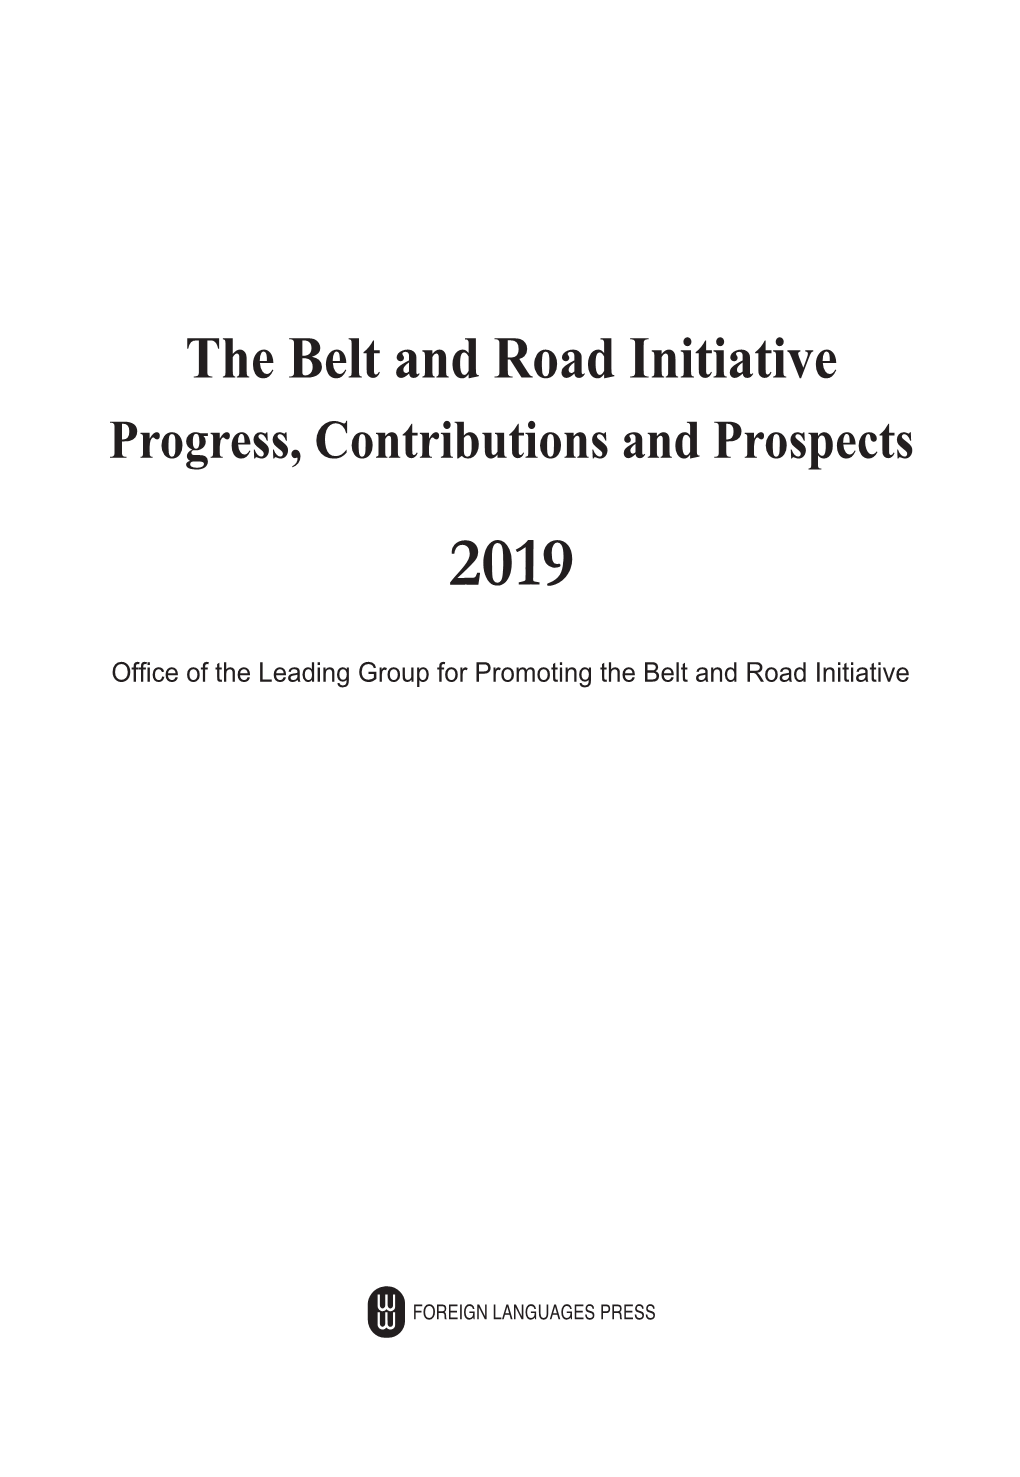 The Belt and Road Initiative Progress, Contributions and Prospects 2019